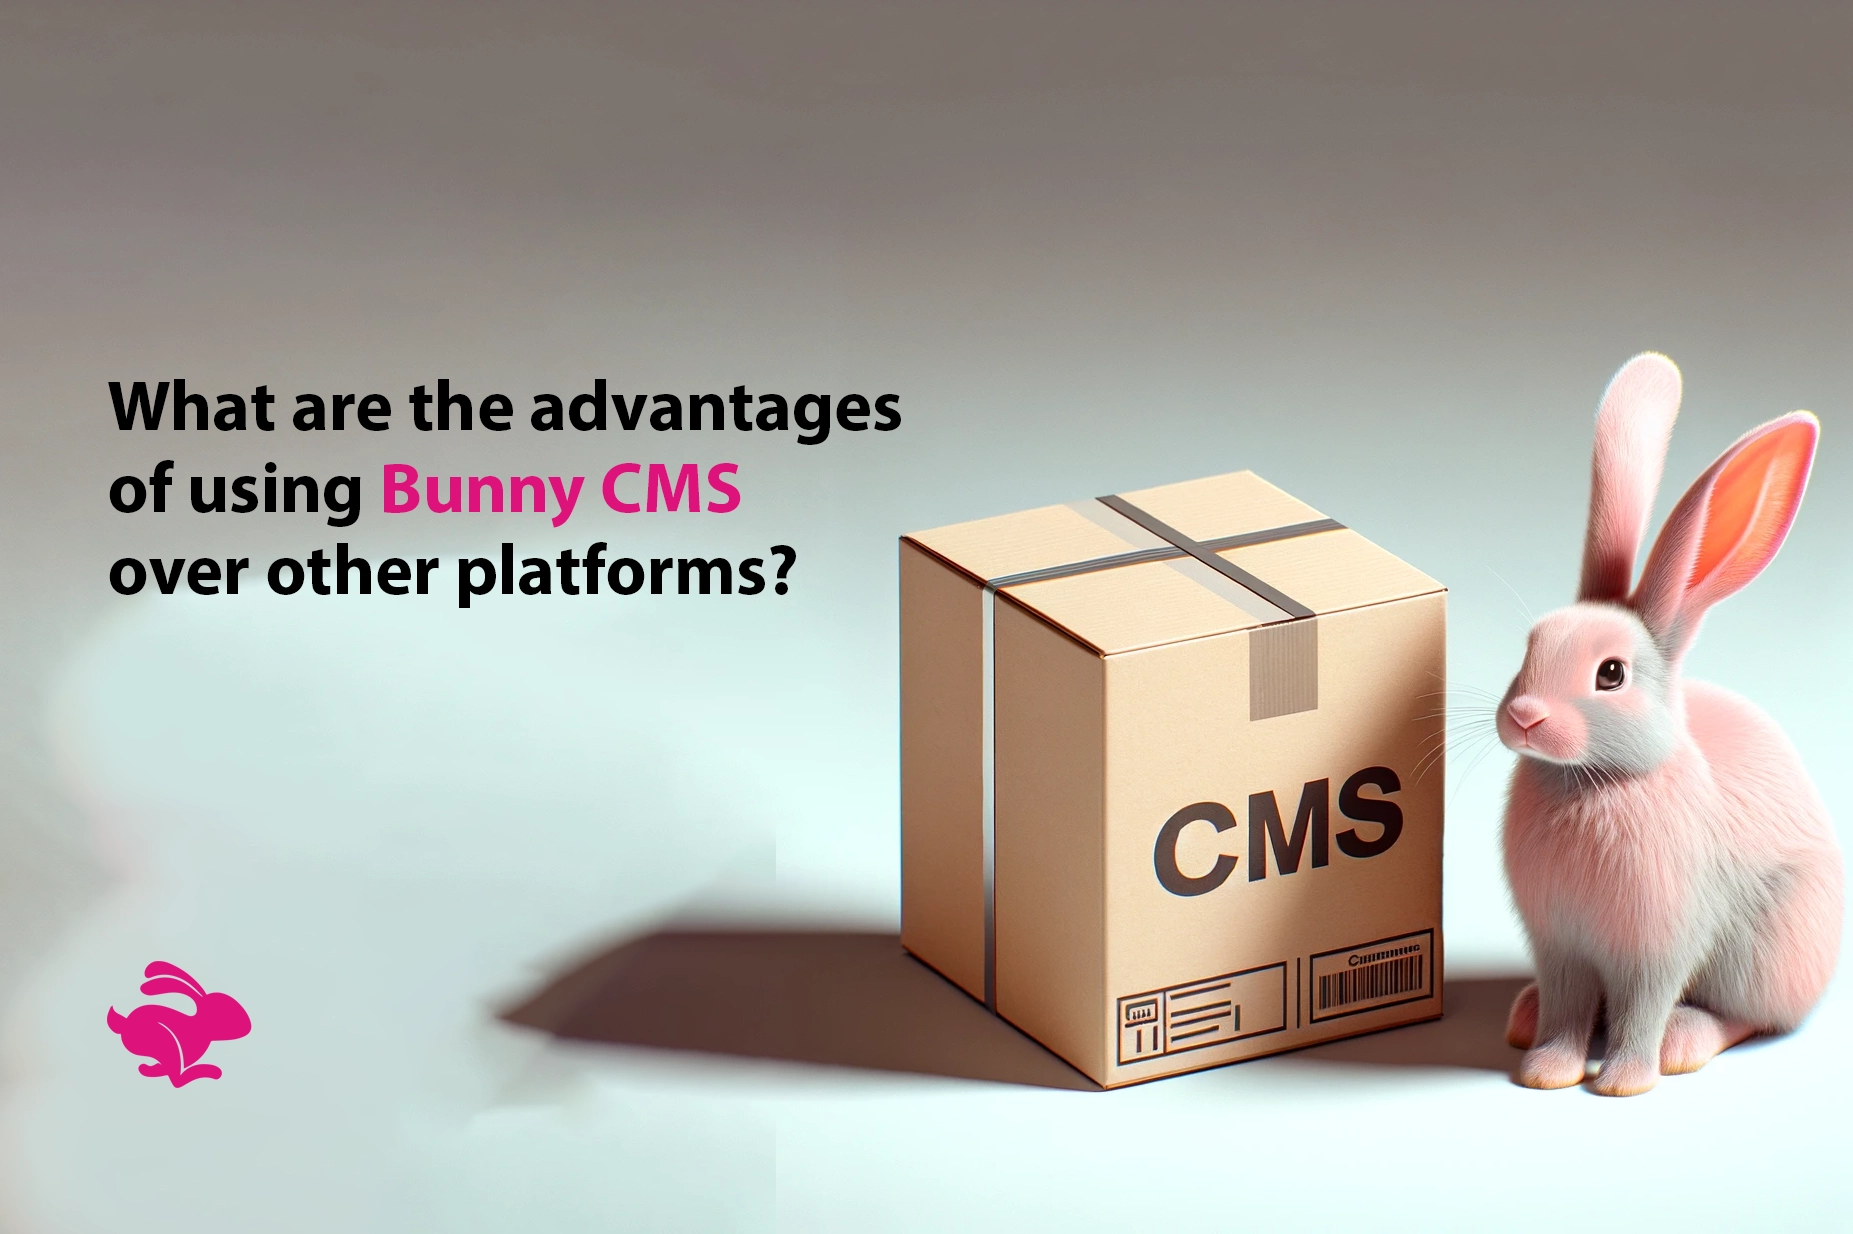 Advantages of using Bunny CMS over other platforms?